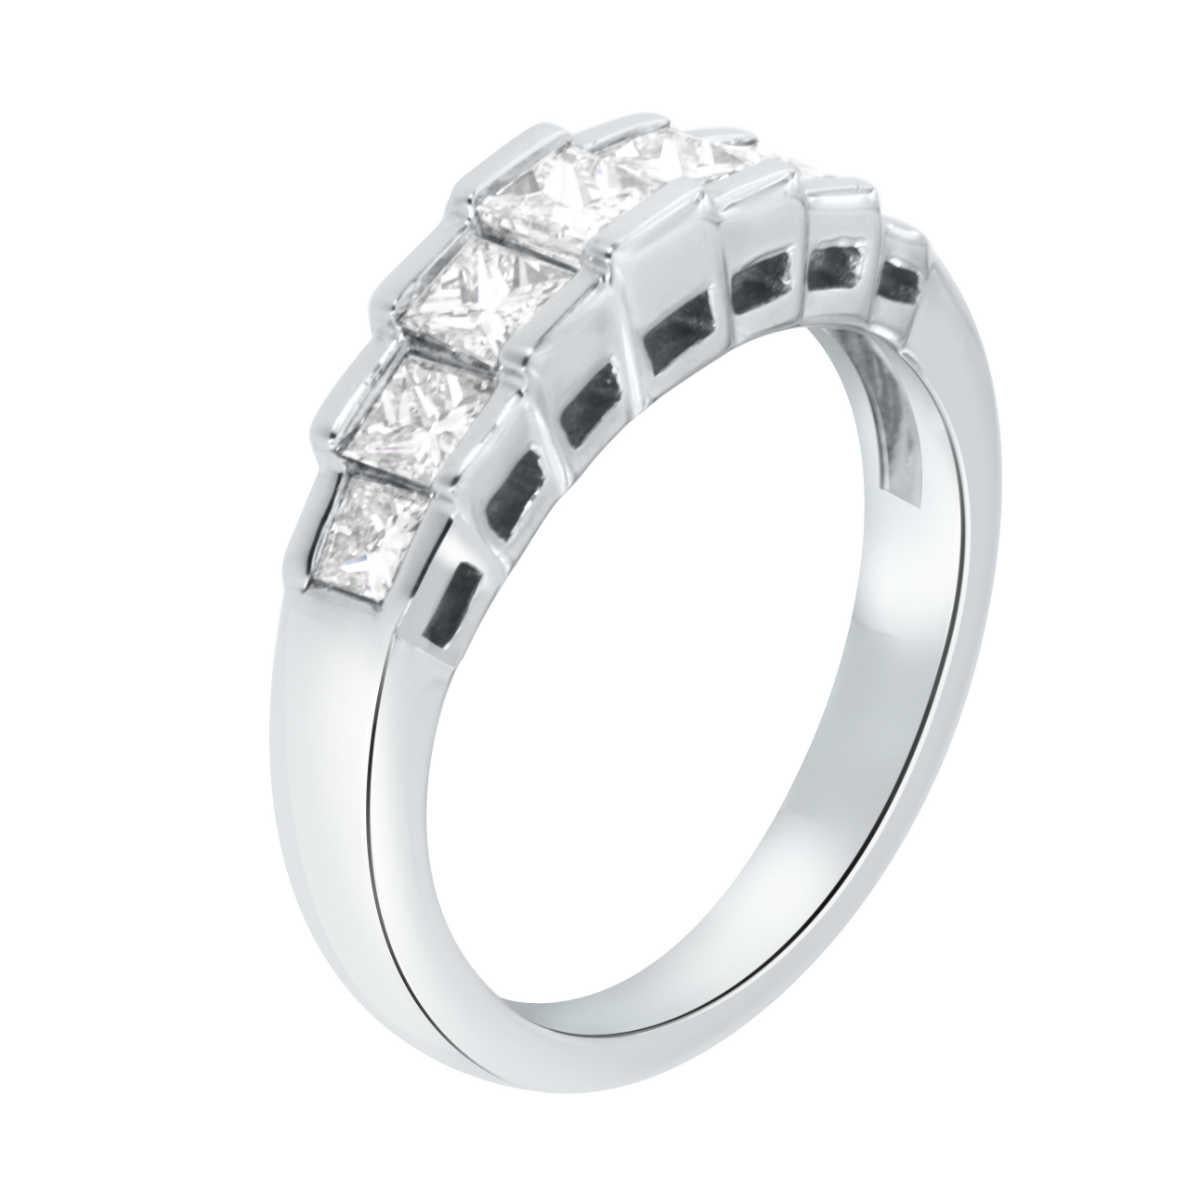 This 18k white gold handcrafted Women's band showcases graduating Princess Cut diamonds on a five (5) MM wide tapered band. The band is in a polished finish.

Diamond Weight : 0.94 Carats
Diamond Color: G-H 
Diamond Clarity: VS2
Finger size : 5